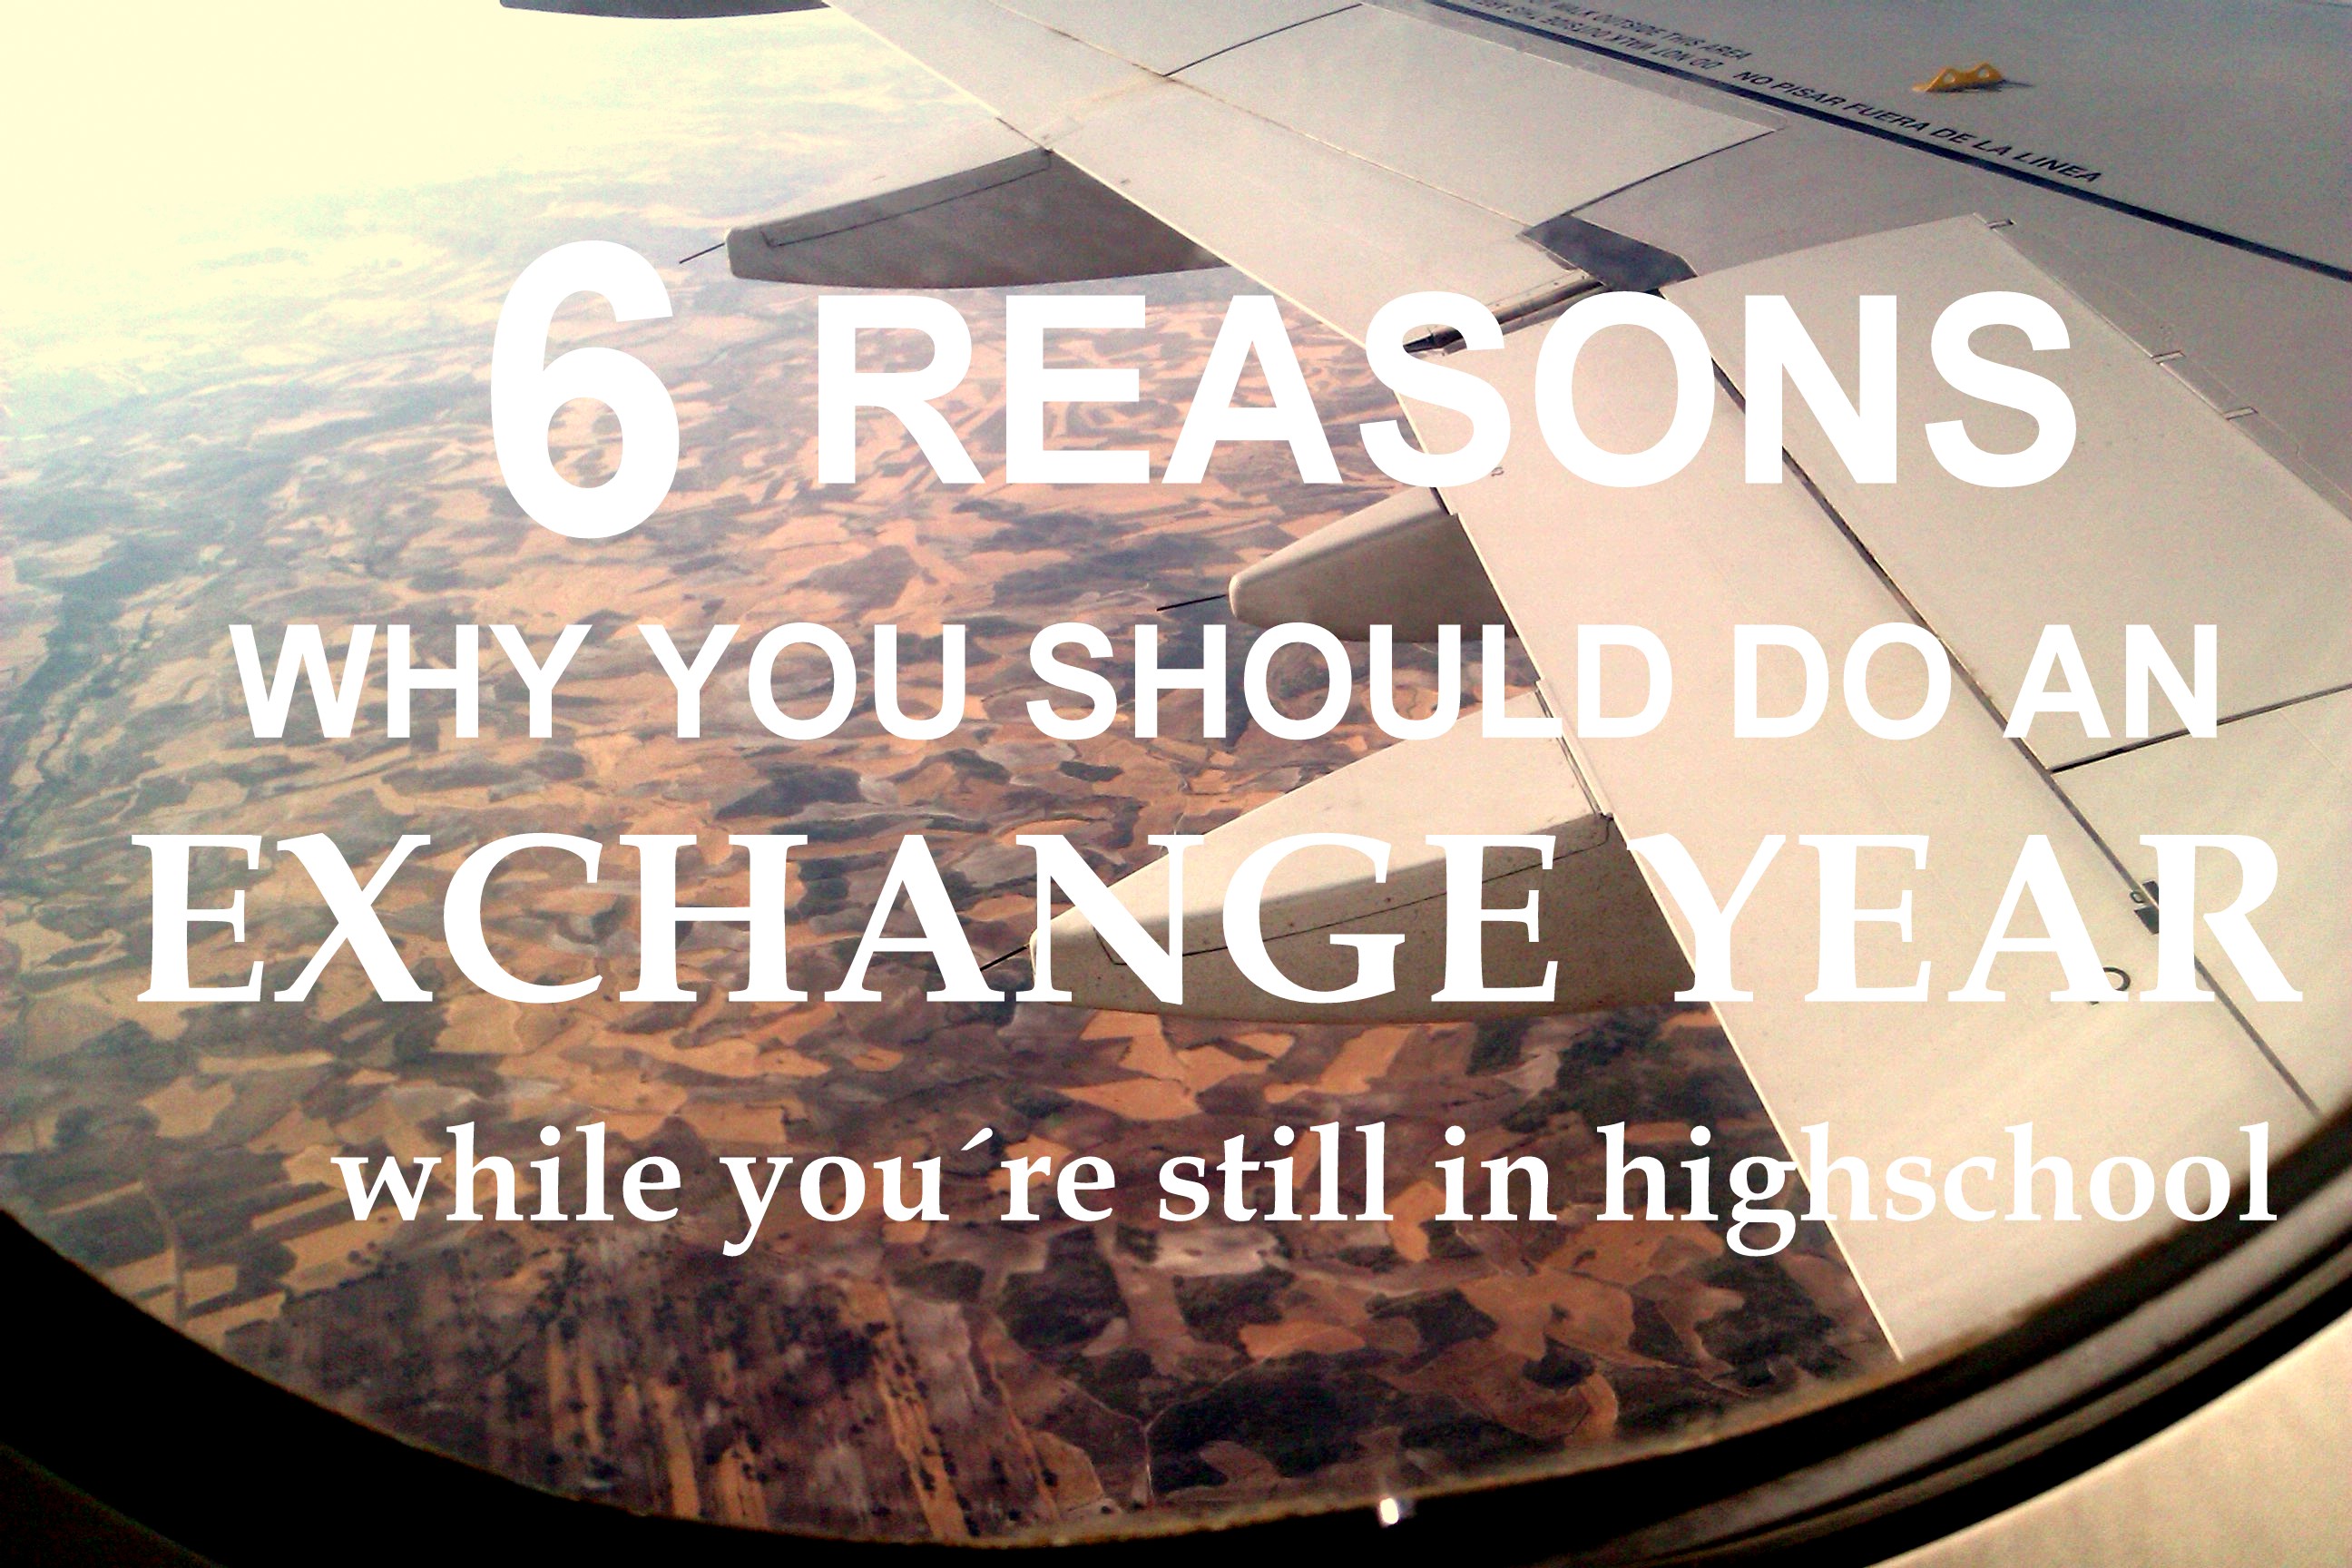 6 reasons why you should do an exchange year when you are still in highschool